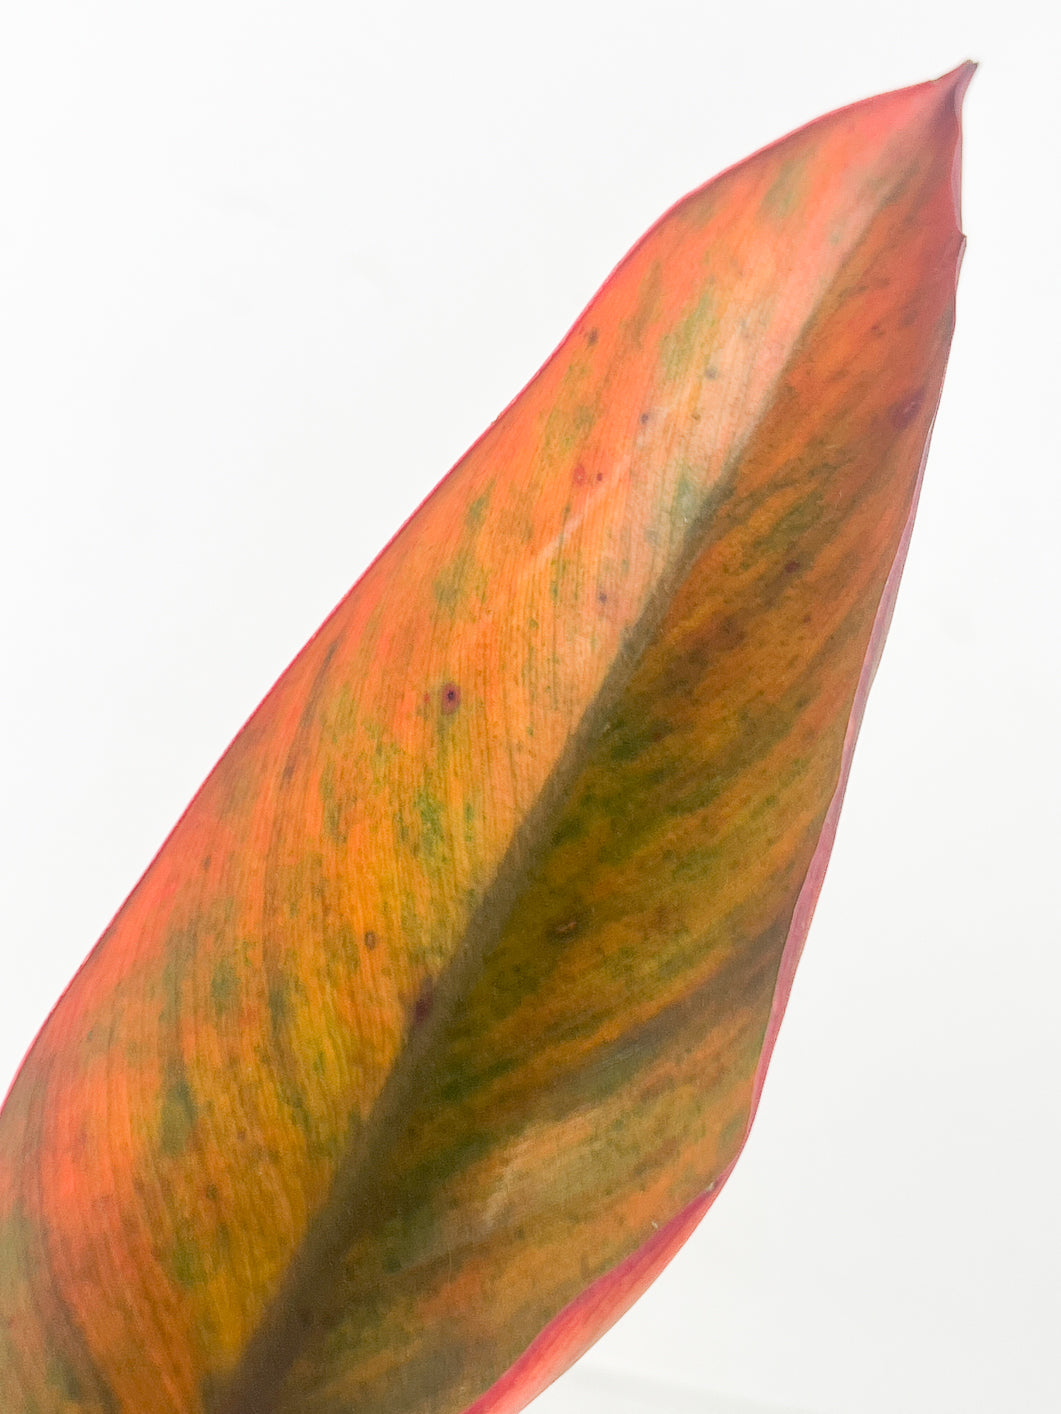 Do Not Buy Unless Authorized: Philodendron Fire Bird 1 leaf unrooted